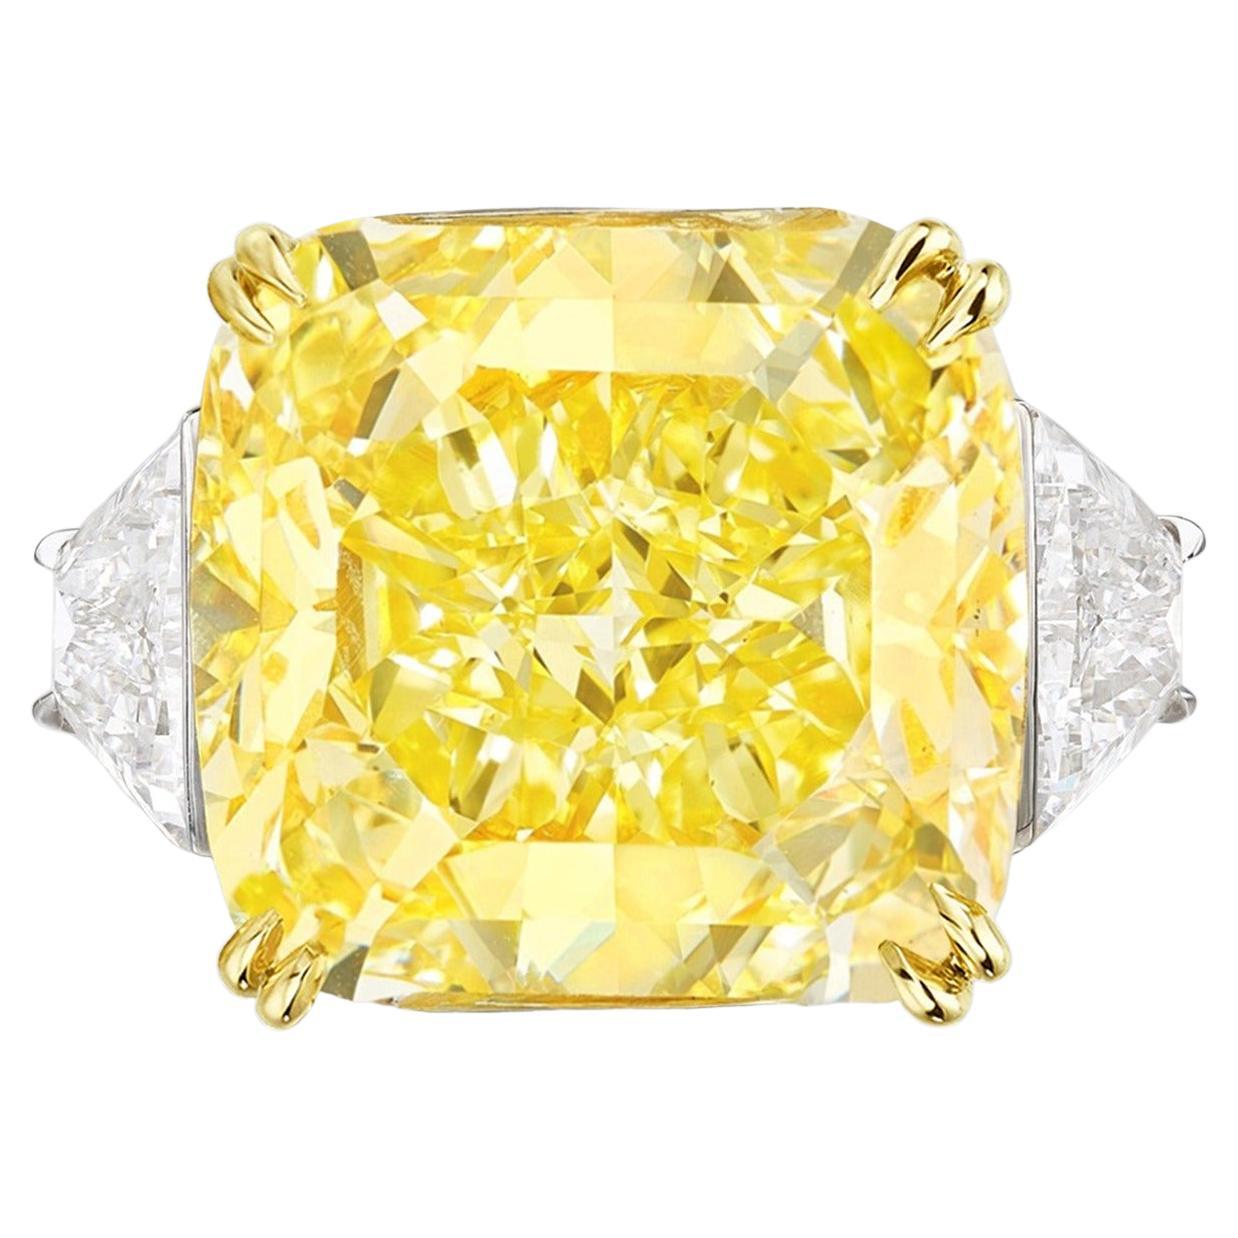 EXCEPTIONAL GIA Certified 23 Carat Fancy VIVID Yellow Diamond Ring